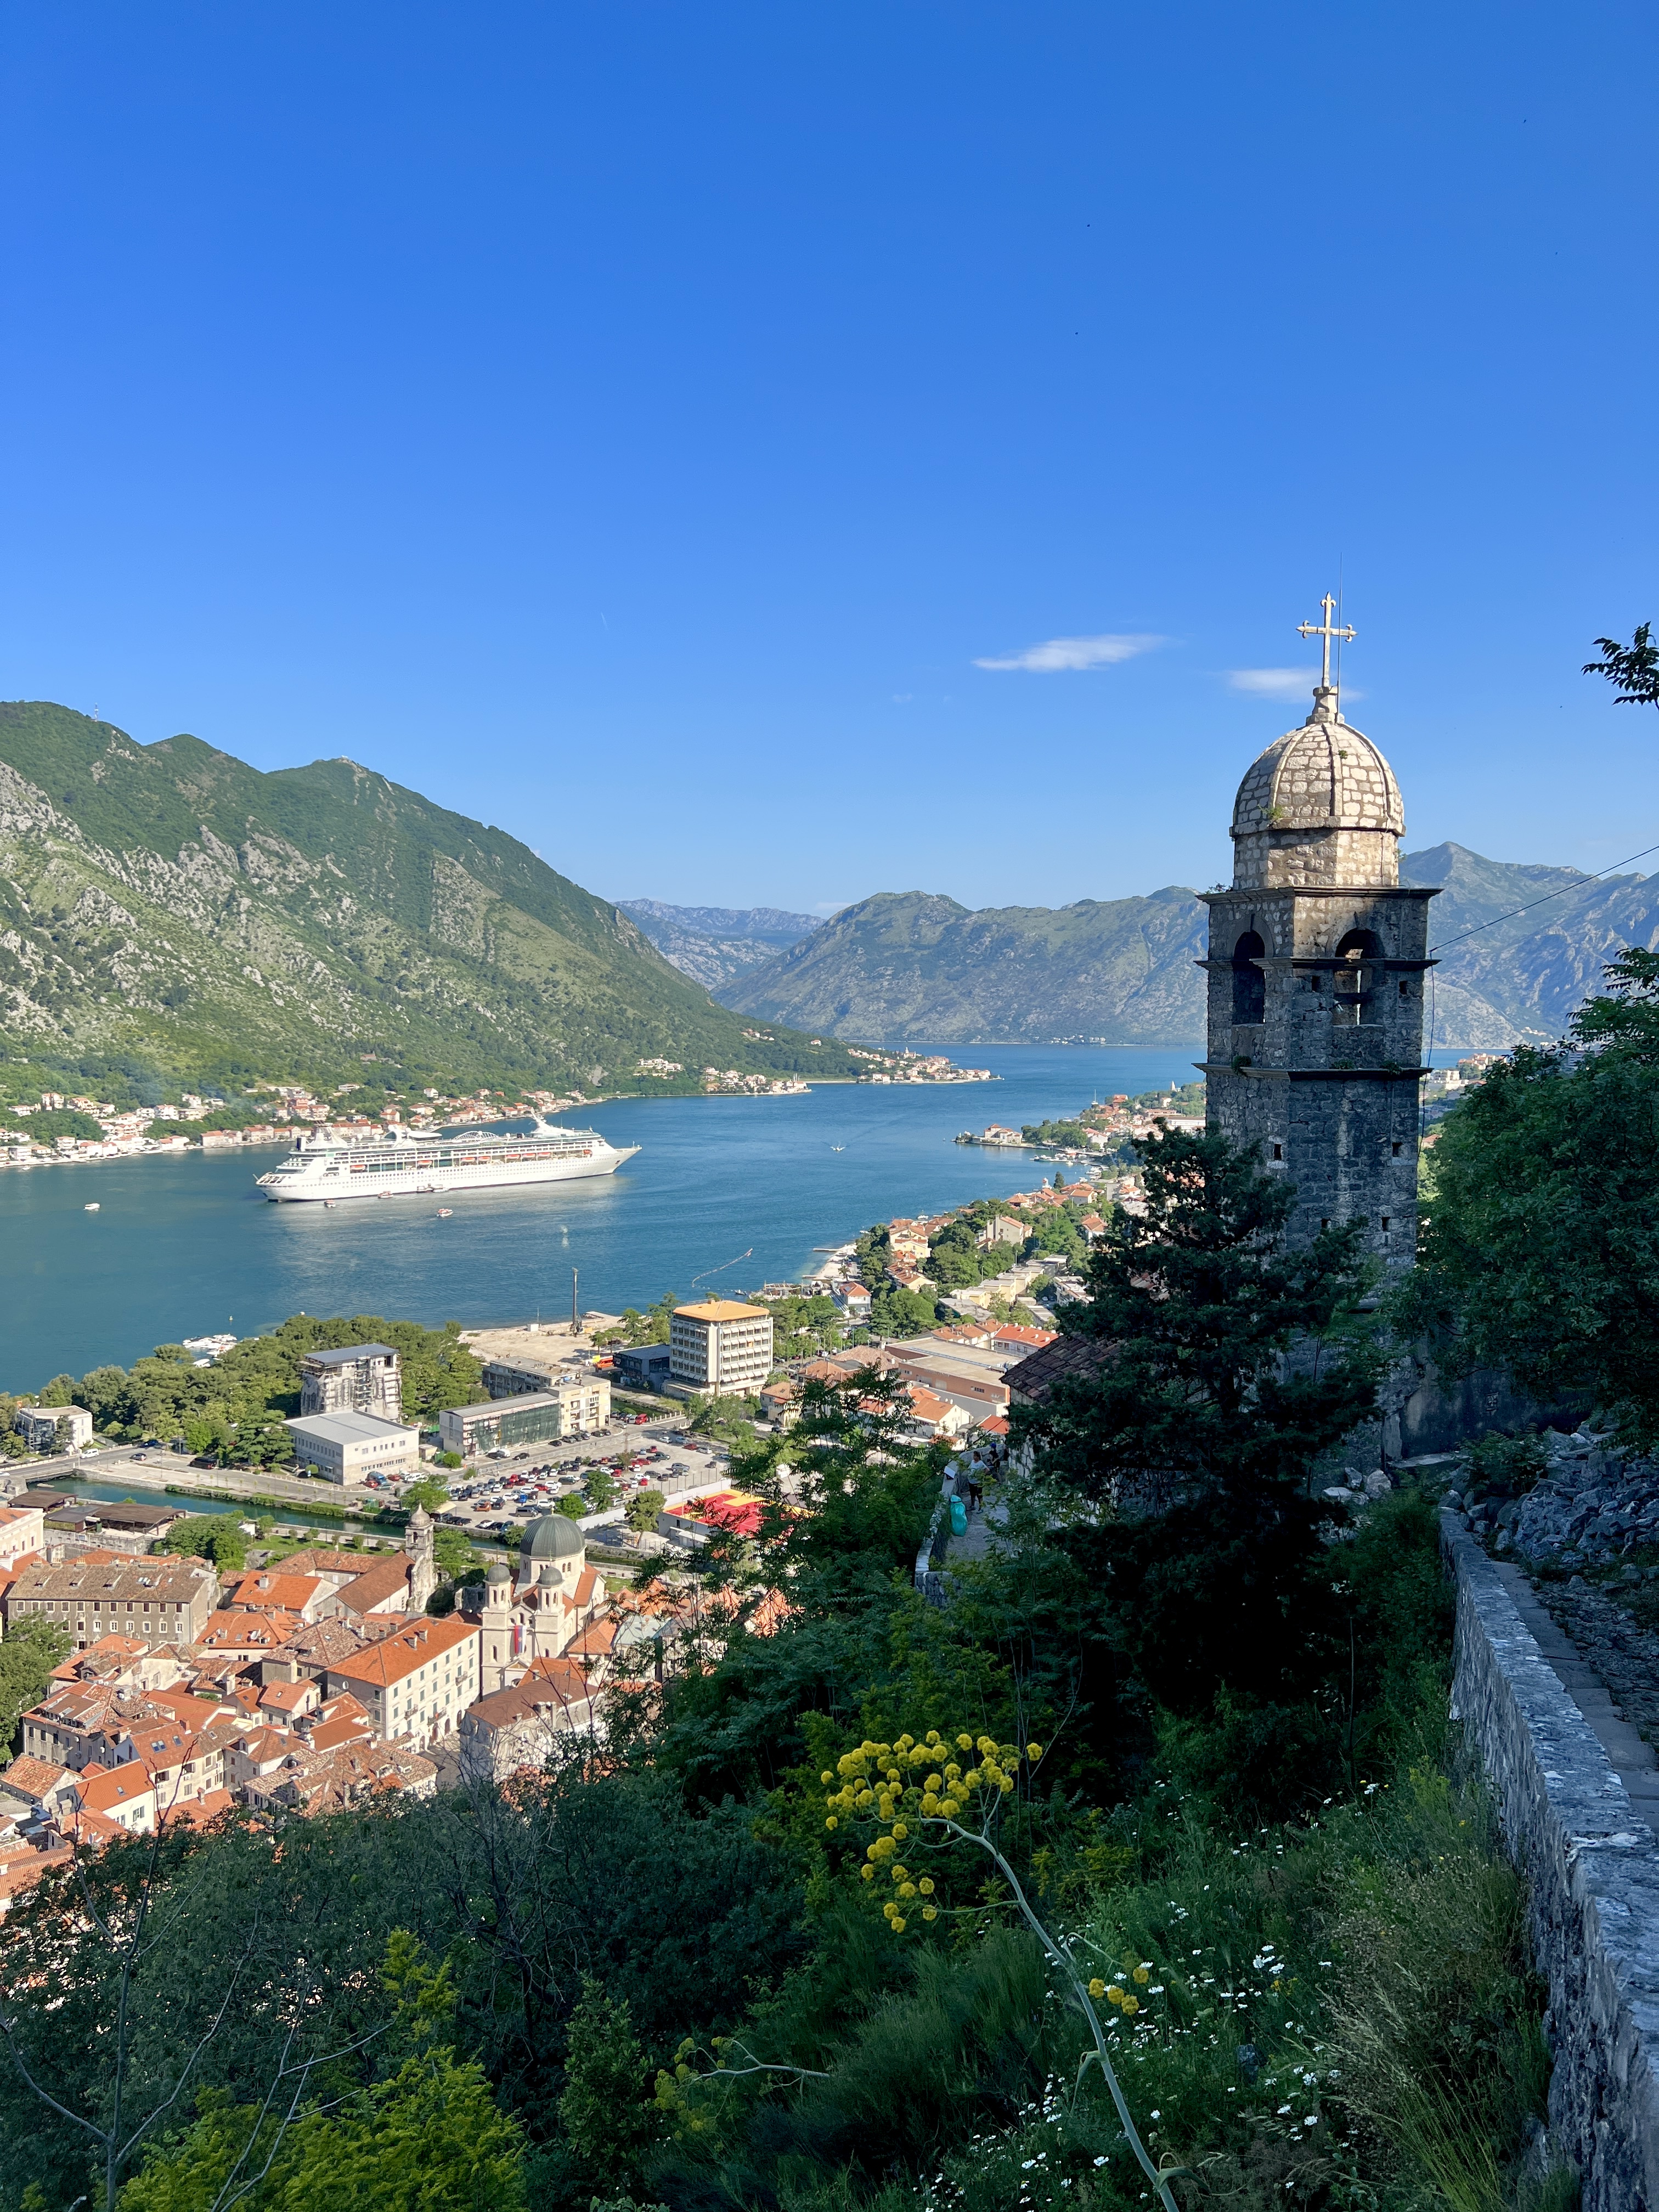 Everything you need to know about spending the day in Kotor, Montenegro including what to see and do.